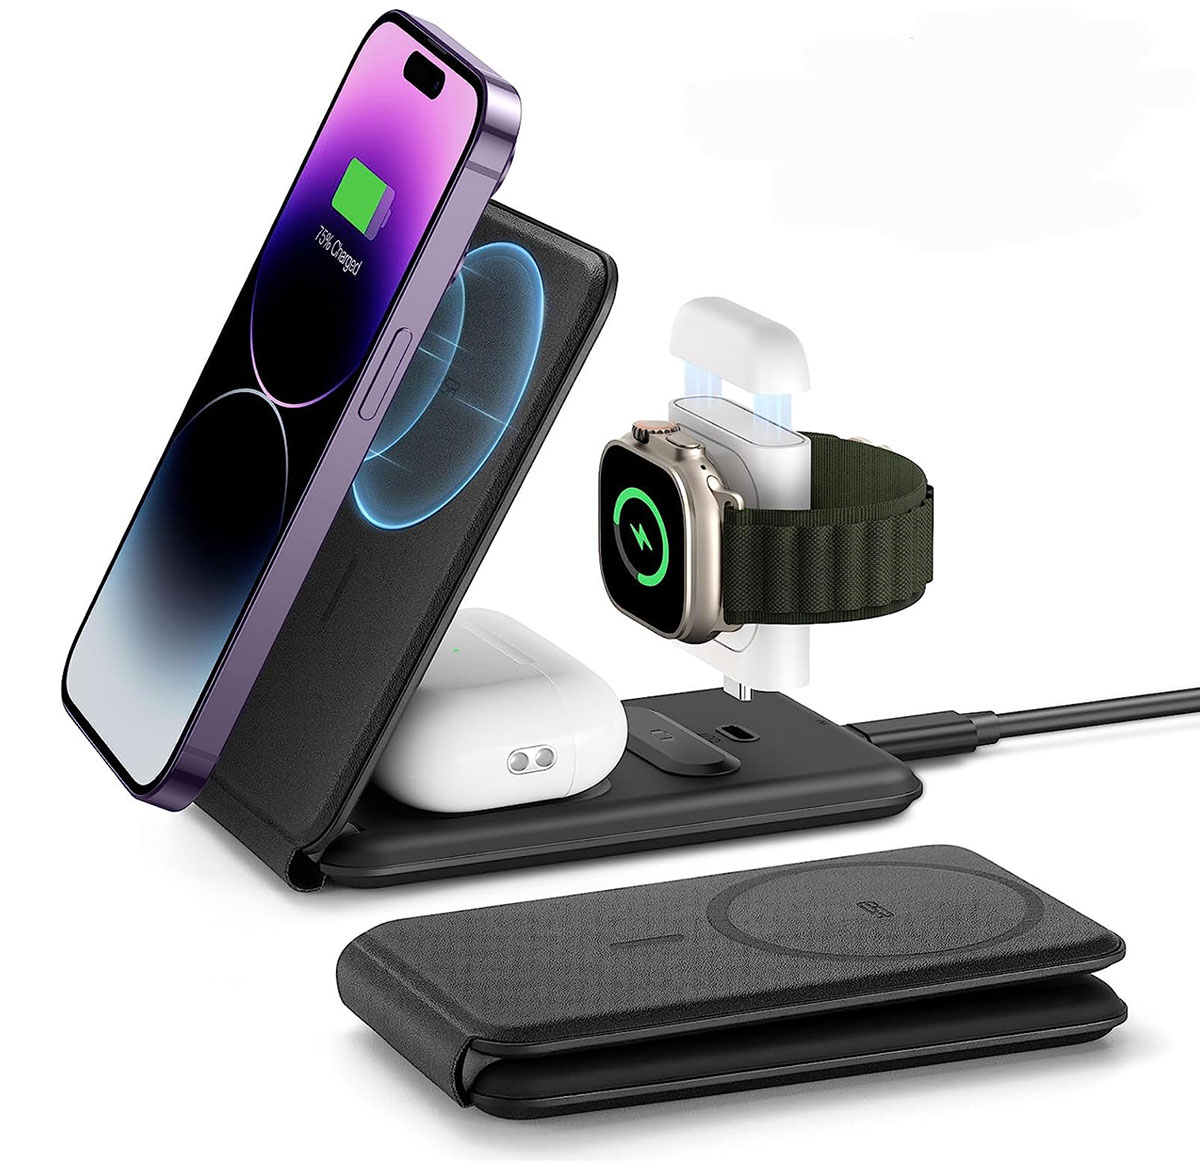 ESR HaloLock 3-in-1 Travel Wireless Charging Set – 3-in-1 travel charger with detachable Watch charger